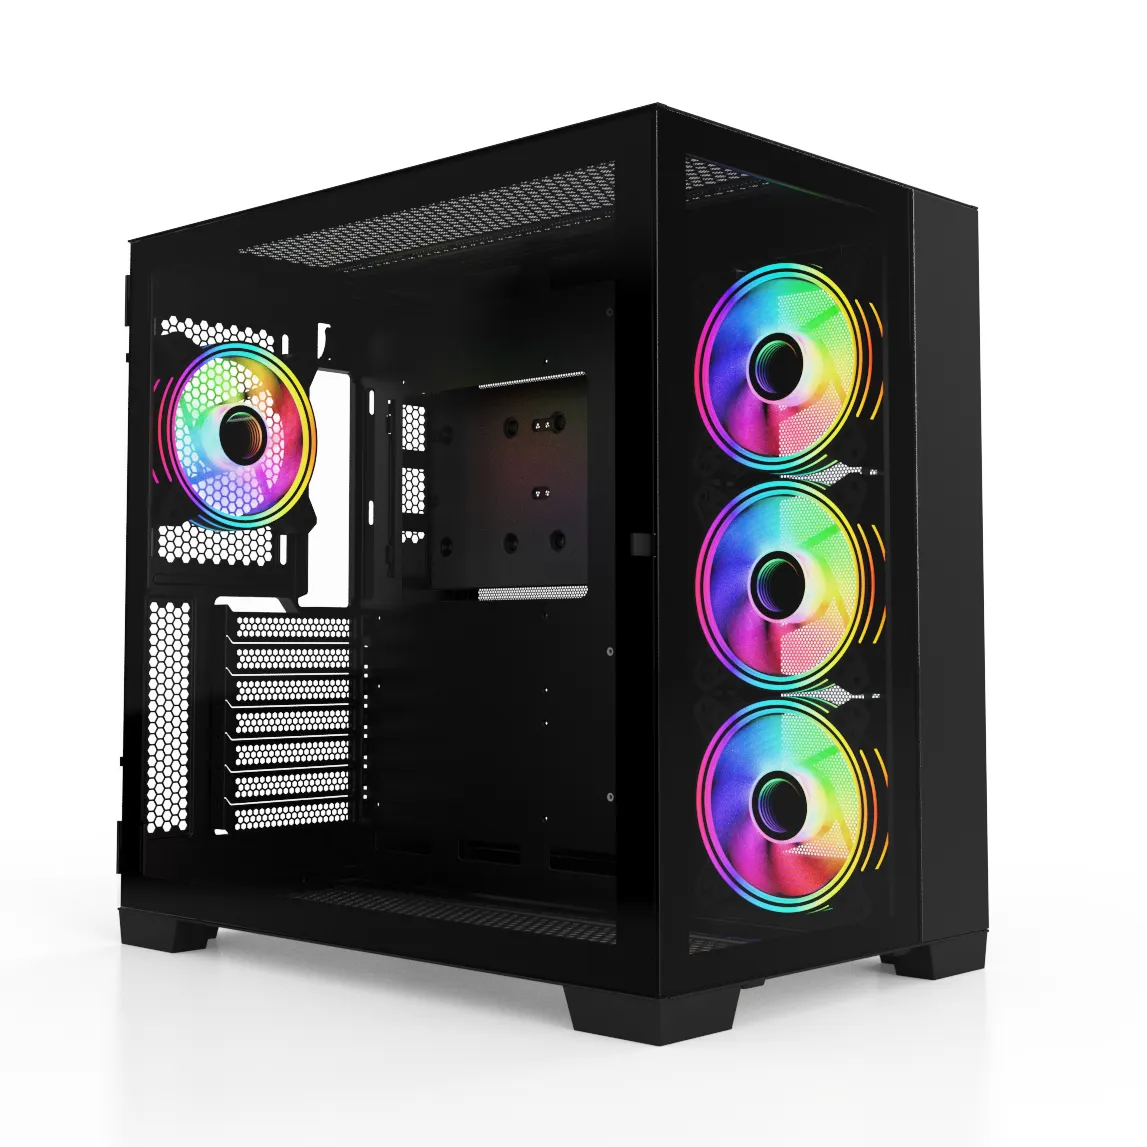 SAMA tempered glass computer cases towers double sided glass gaming case OEM ODM pc case